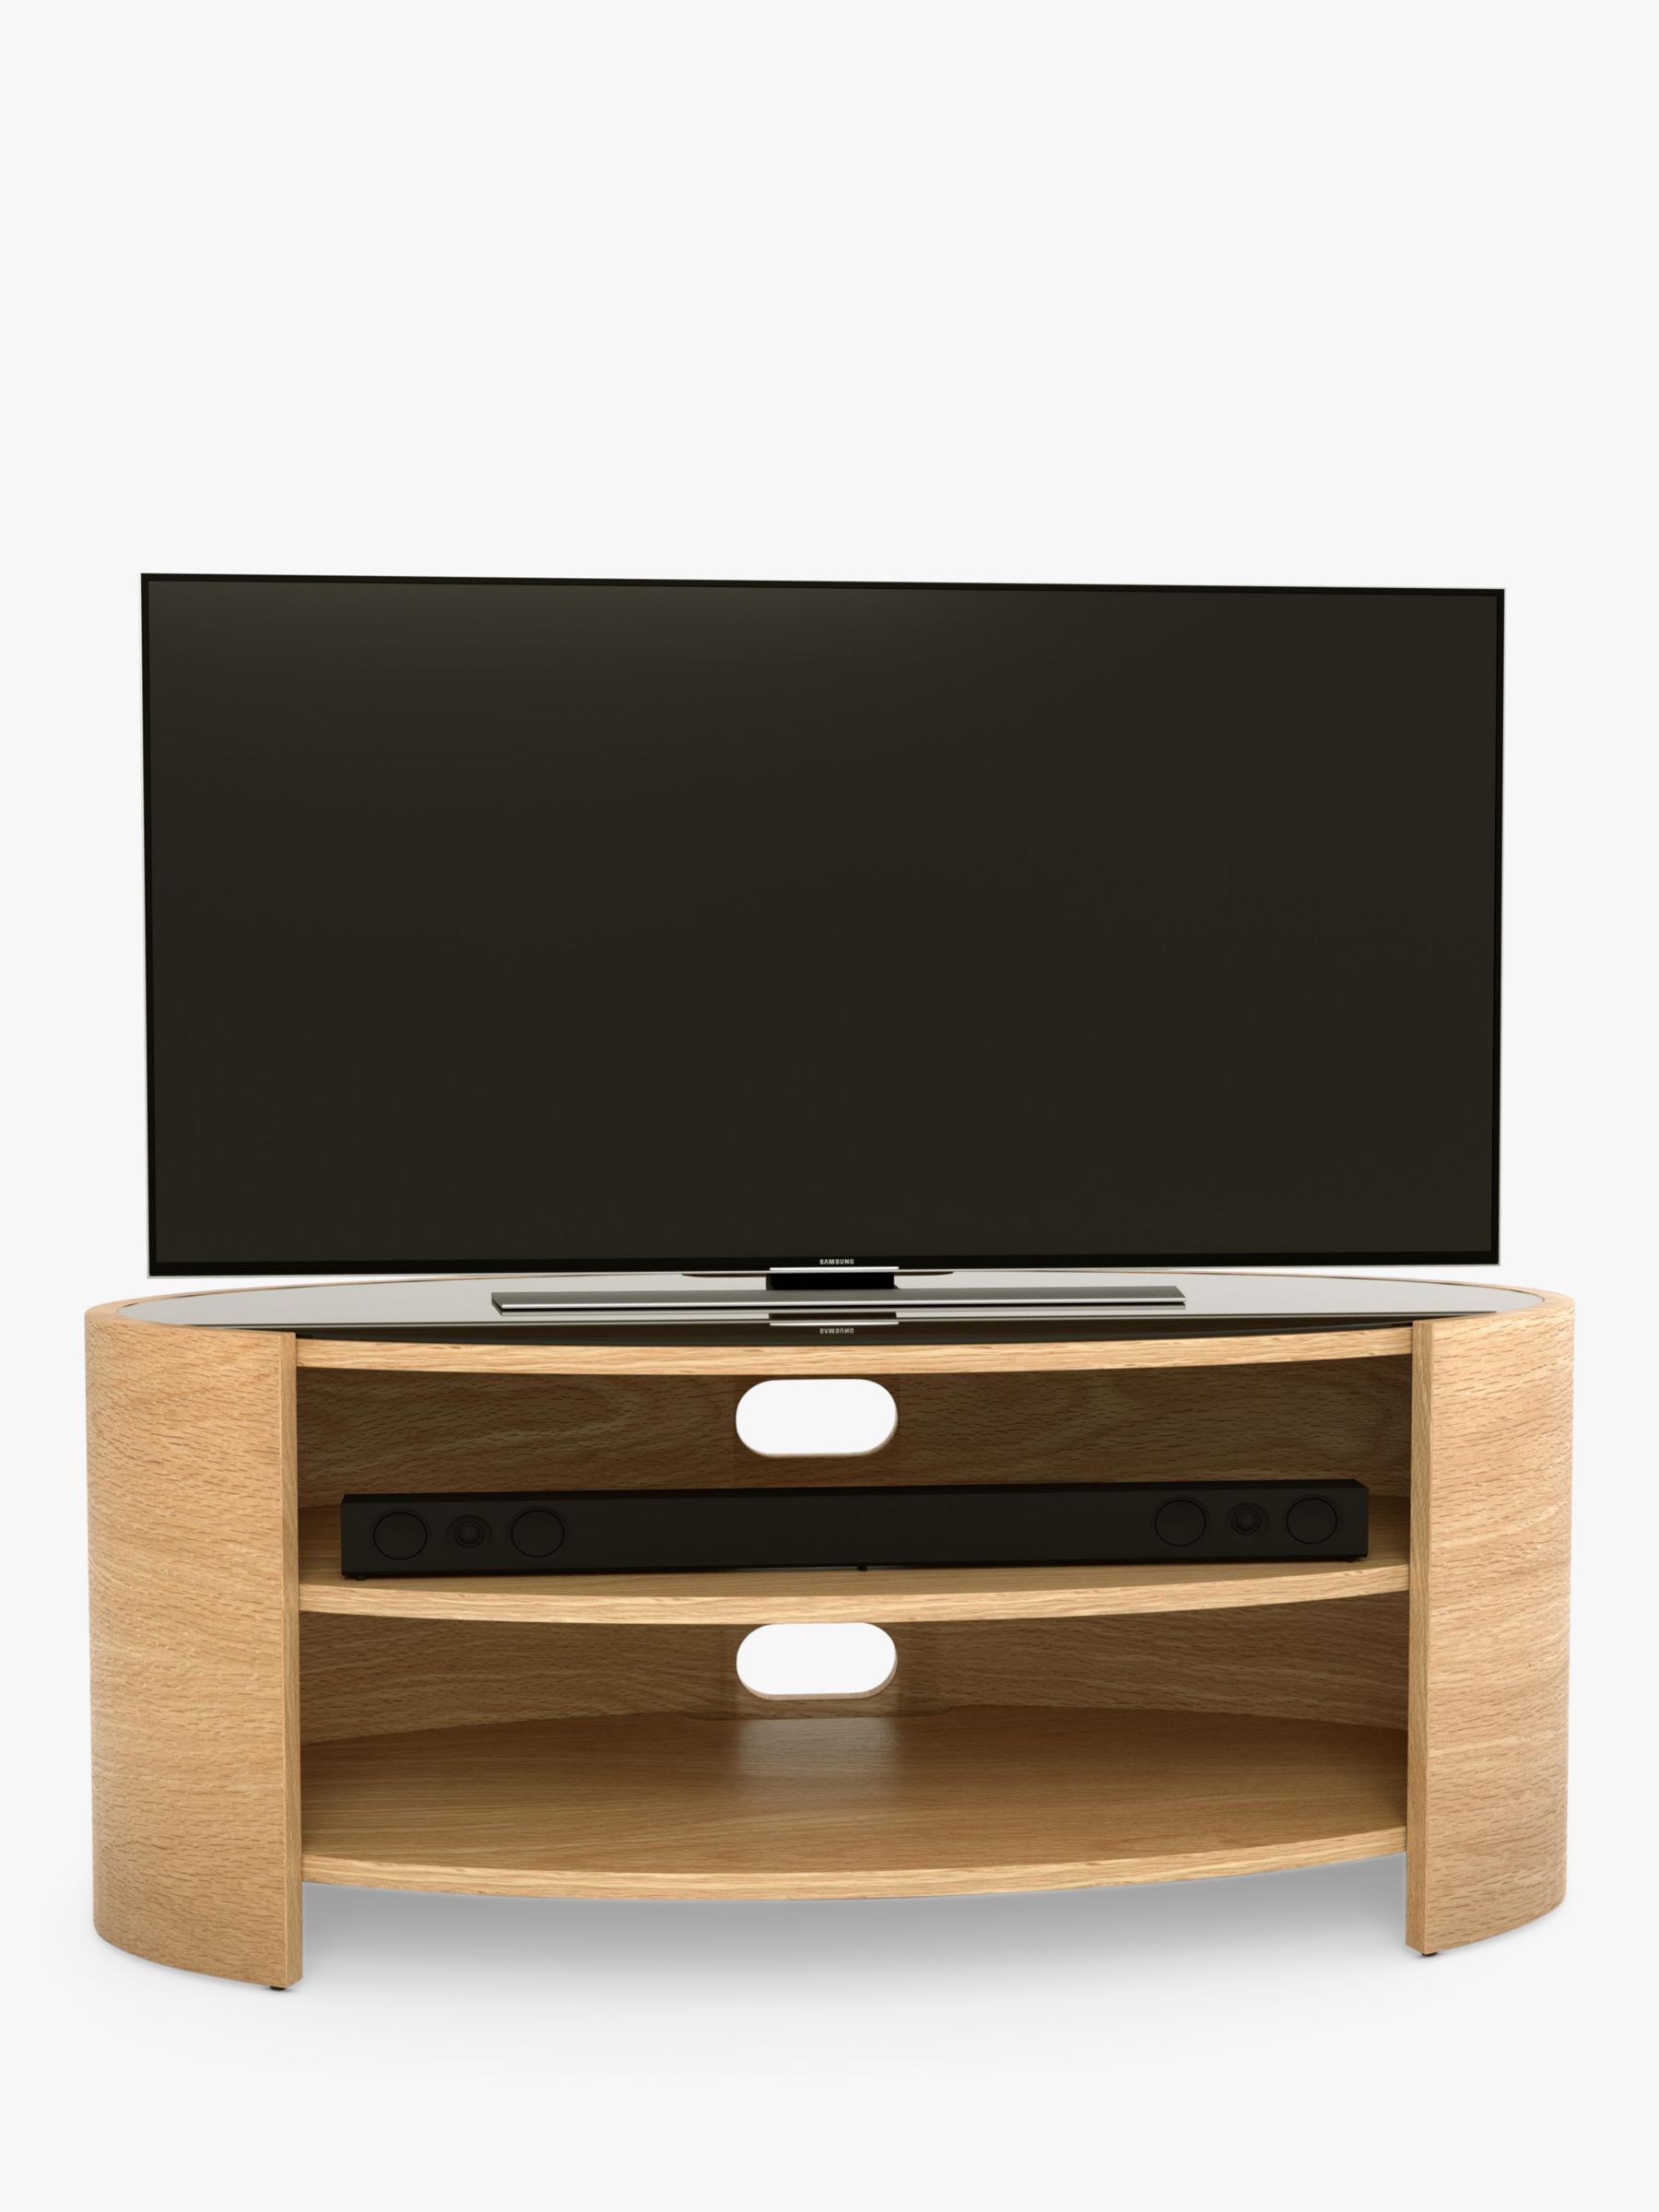 Photo of Tom schneider elliptic deluxe 100 tv stand for tvs up to 45